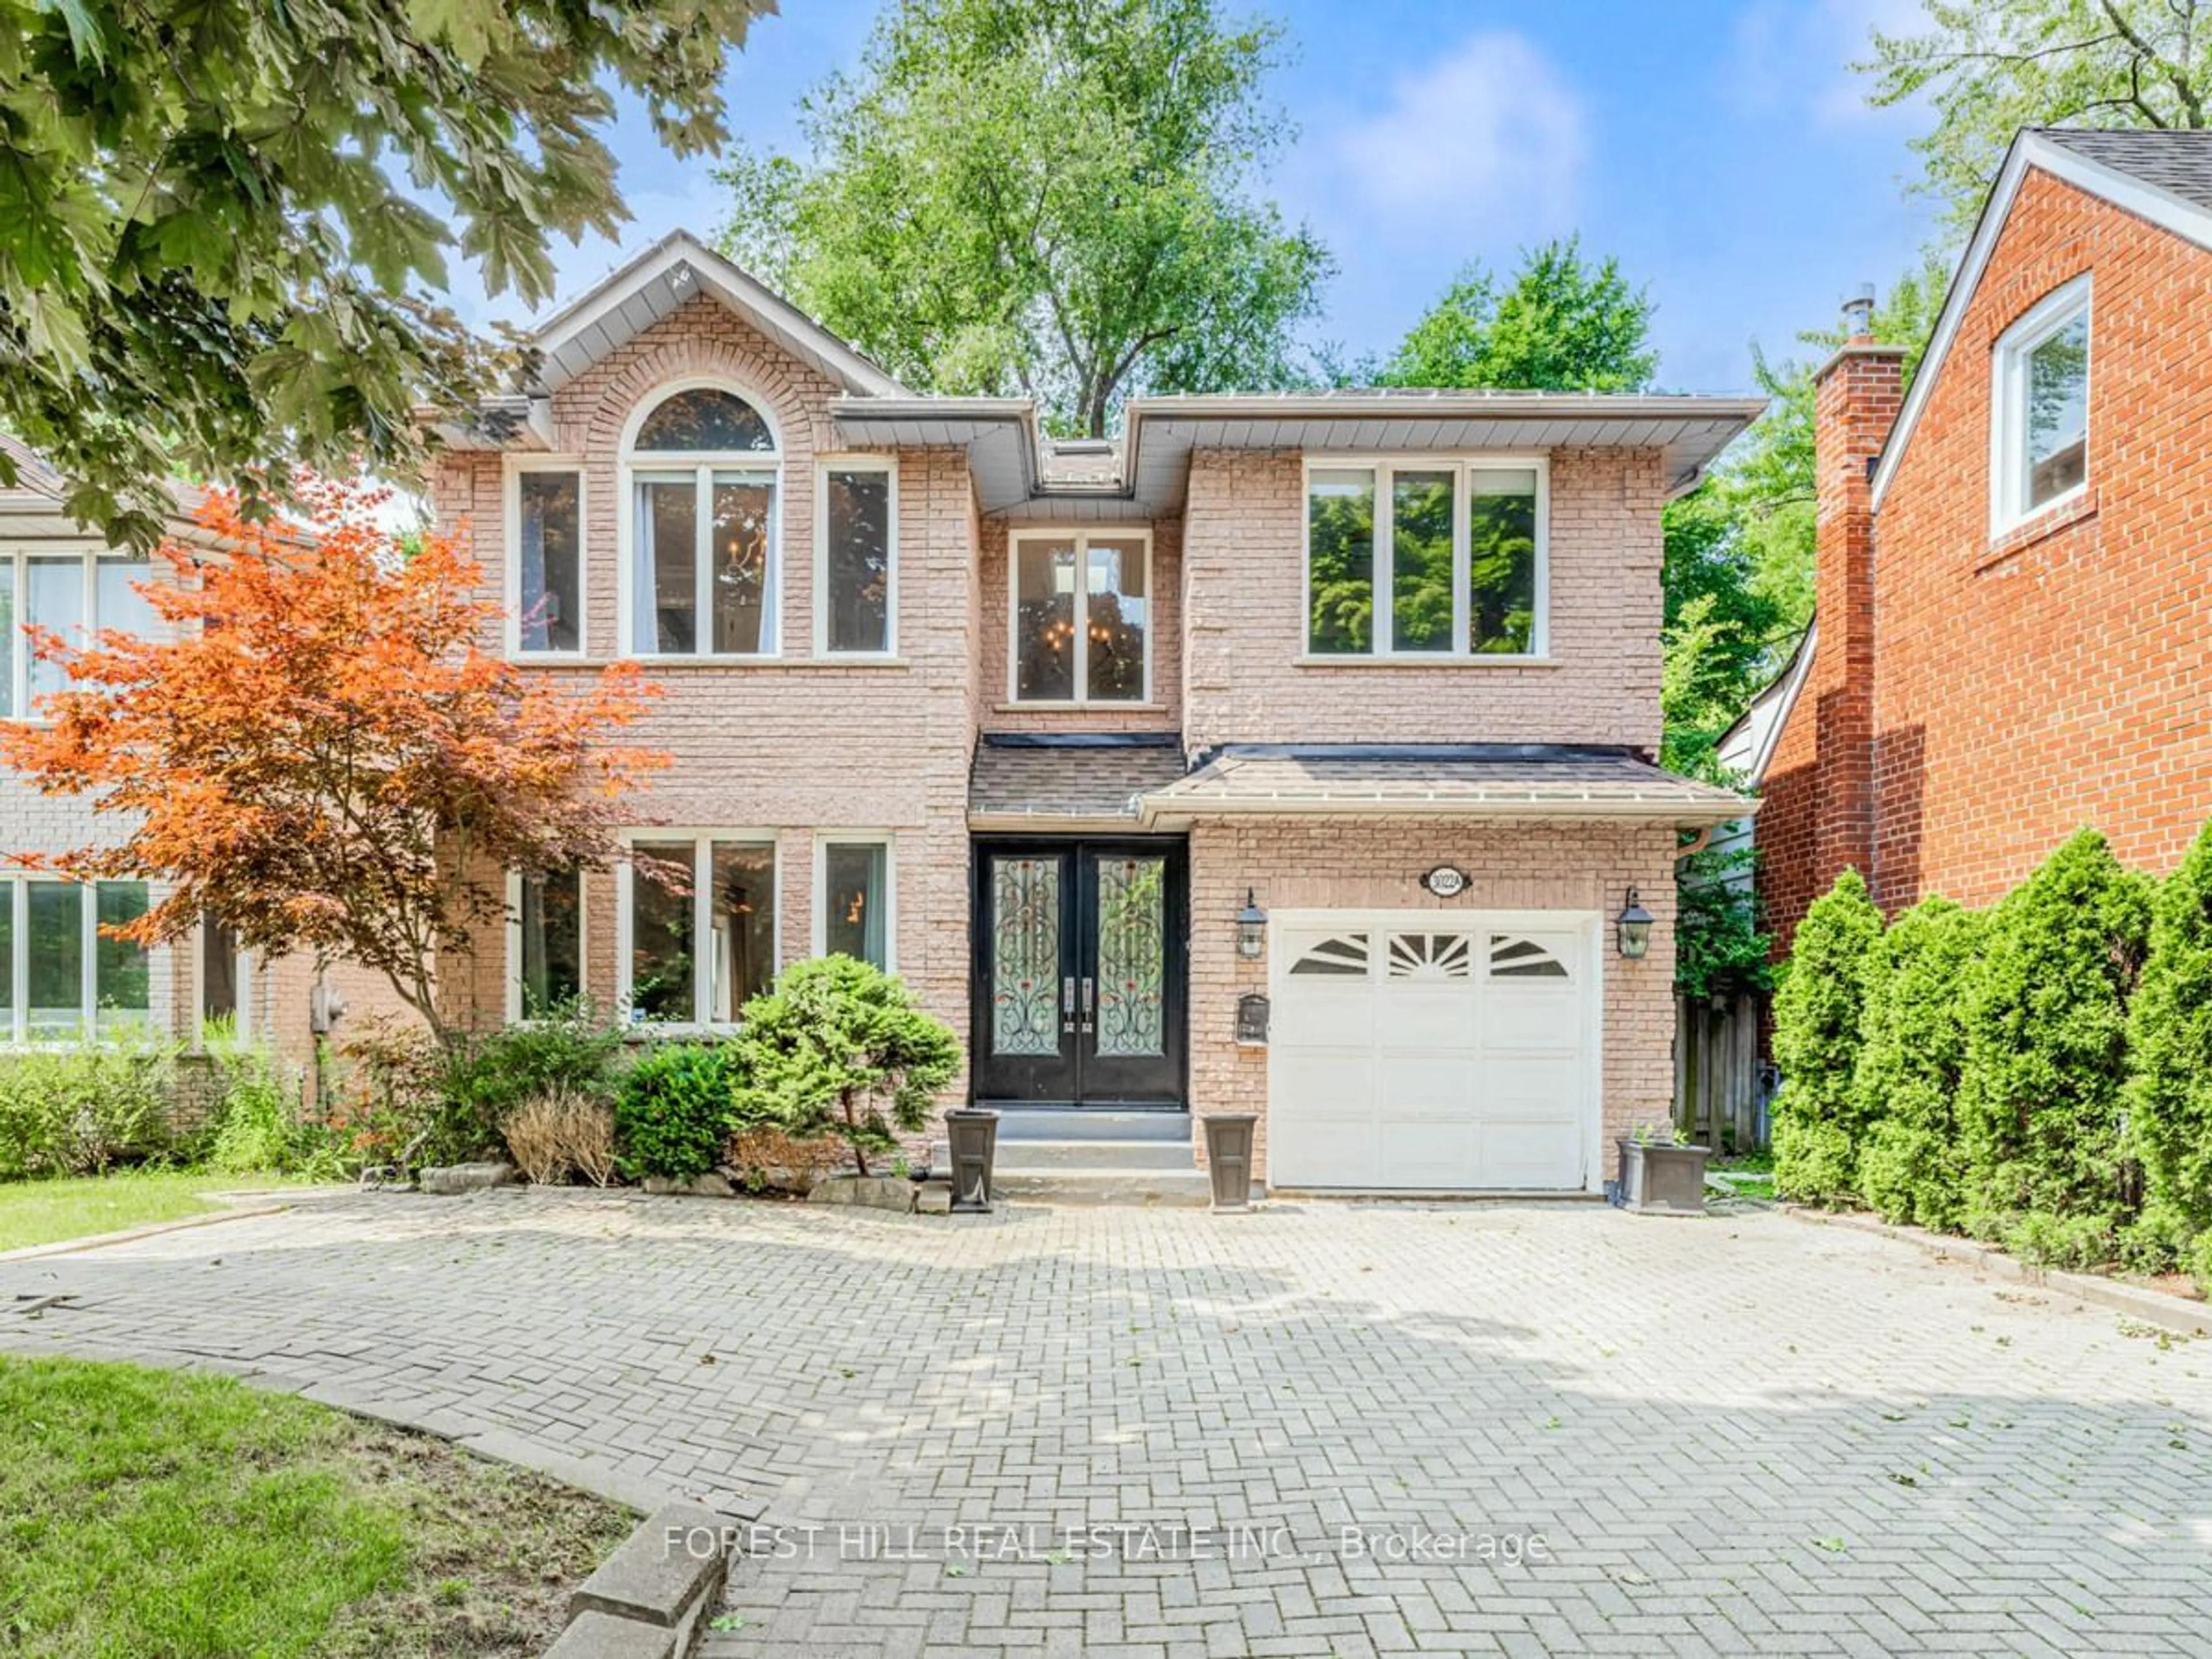 Home with brick exterior material for 3022A Bayview Ave, Toronto Ontario M2N 5L1